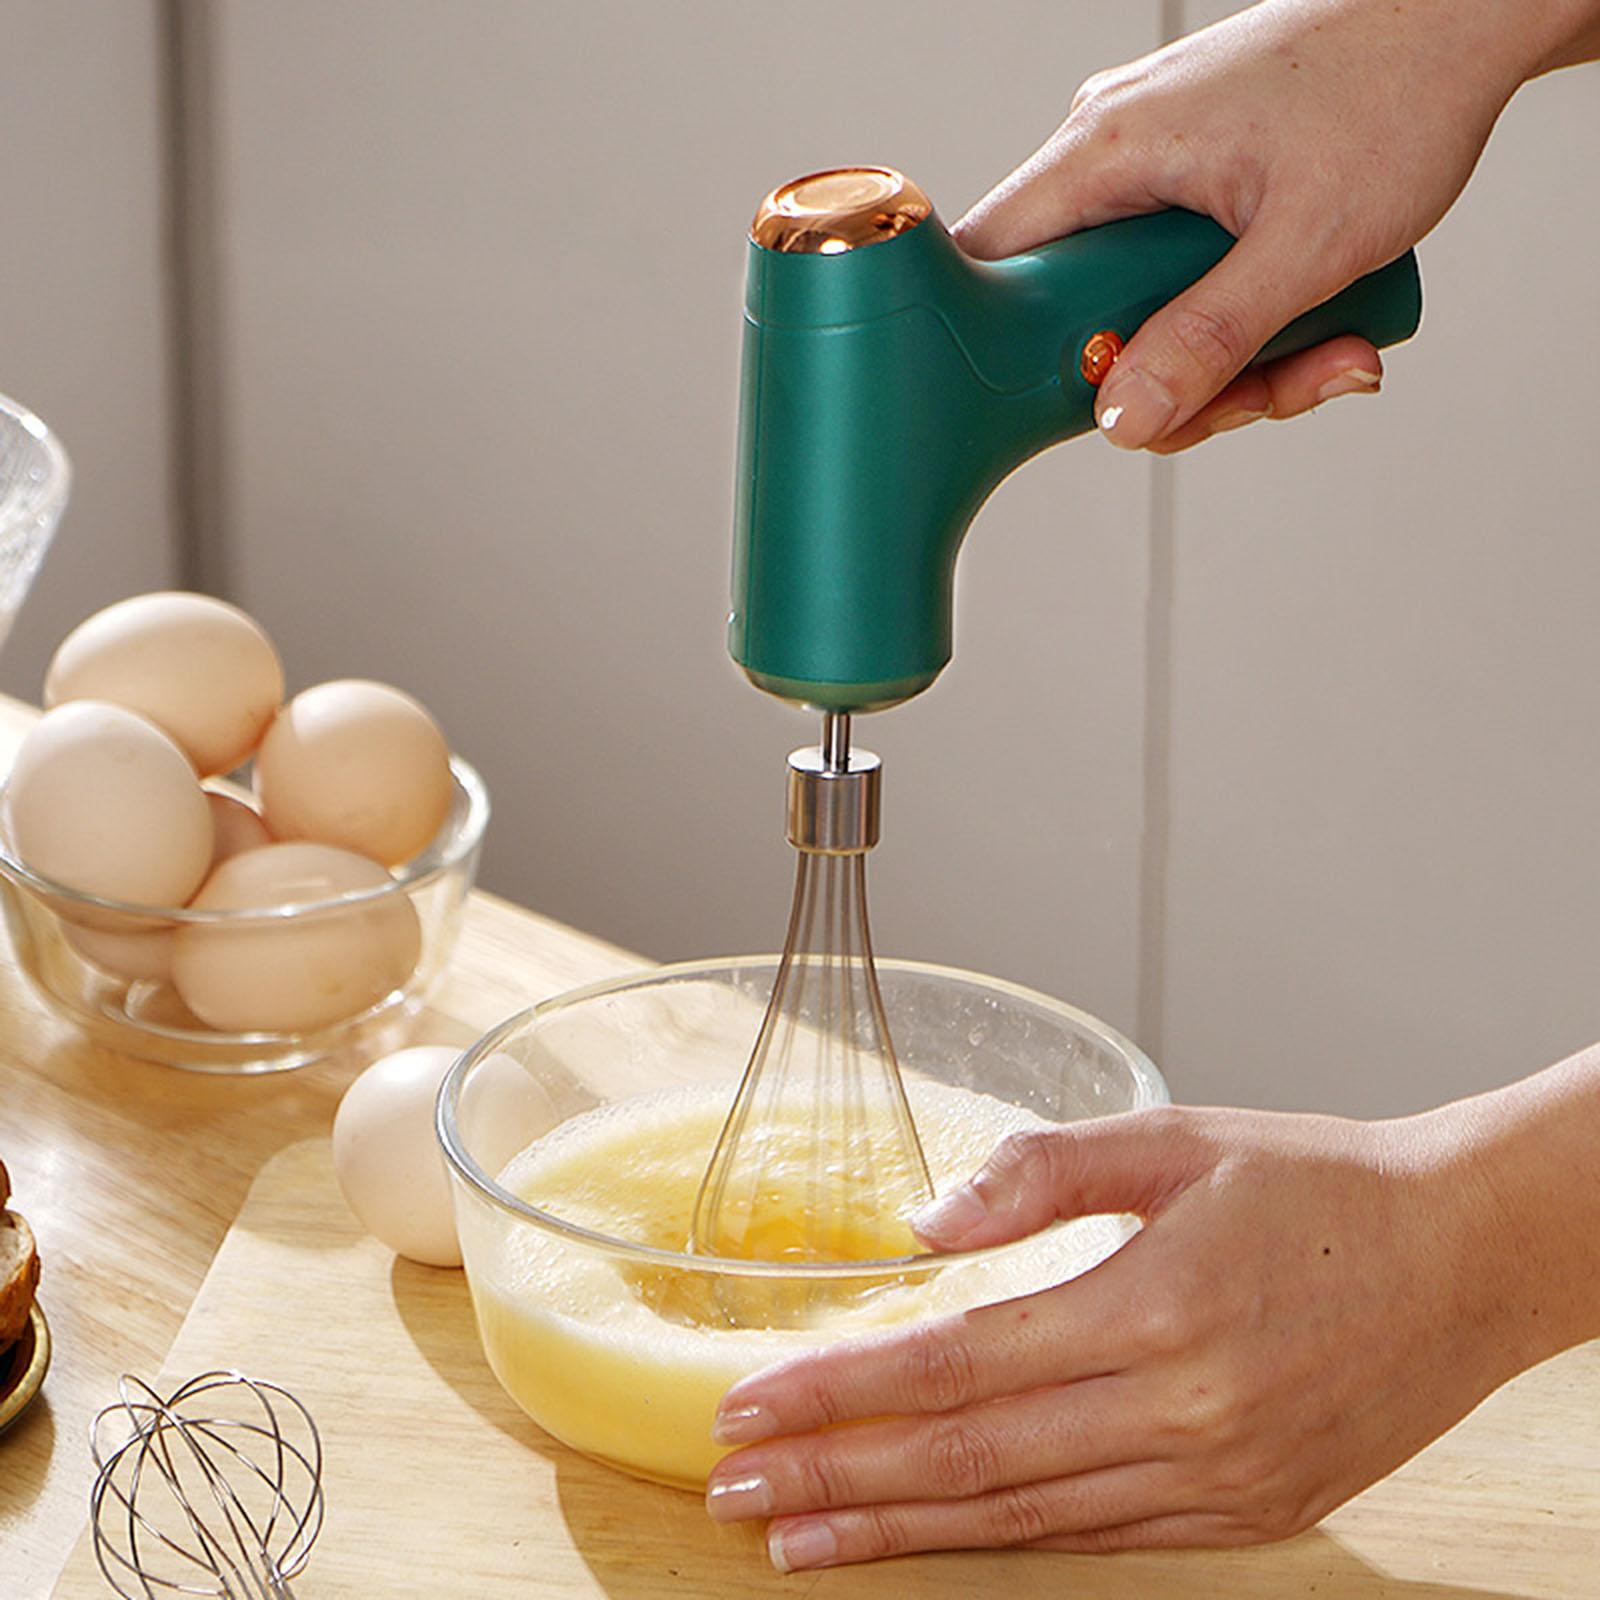 Handheld Electric Egg beaterCordless Baking Cream Whisk, 3-in-1 Hand Mixer for Home Kitchen Baking, Green